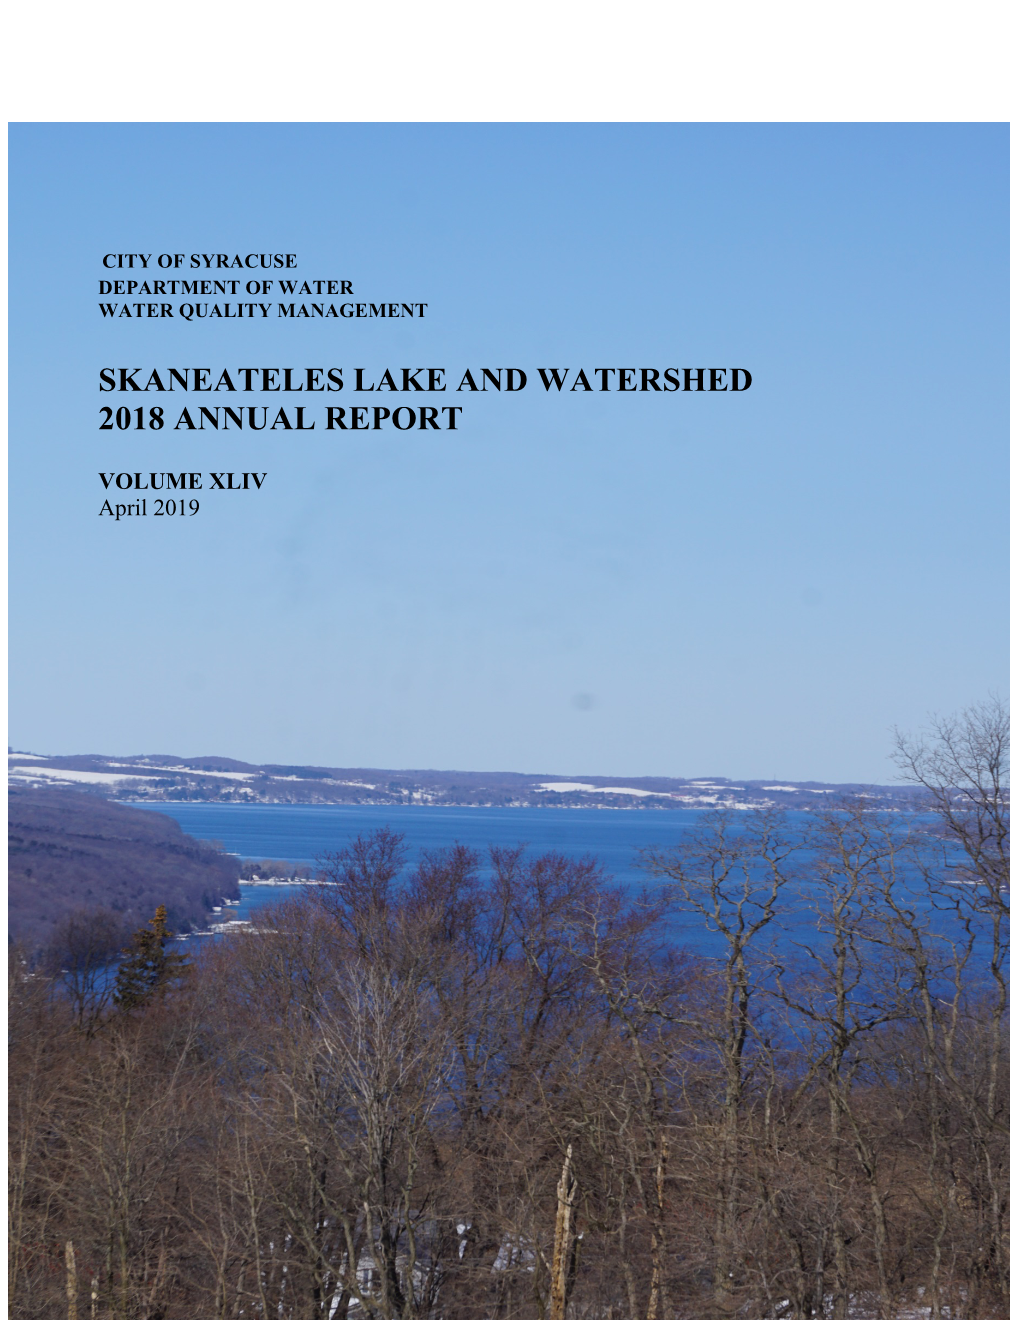 Skaneateles Lake and Watershed 2018 Annual Report